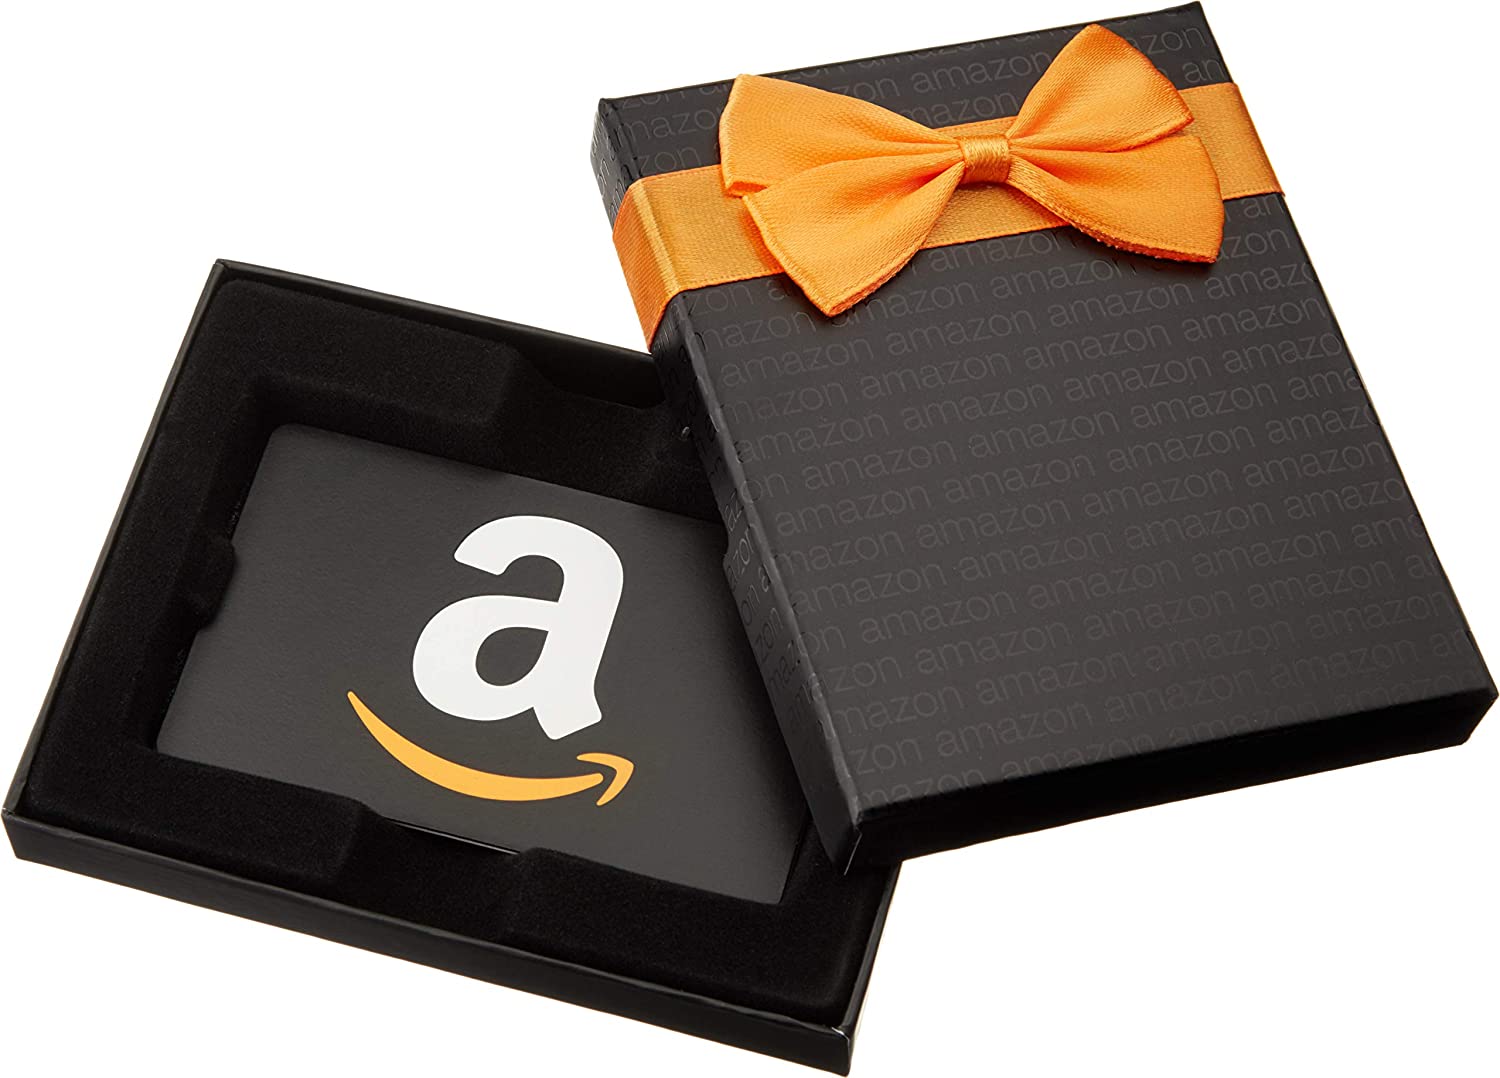 Get a $100 Amazon Gift Card For Every Pest Successful Control Referral You Send Our Way